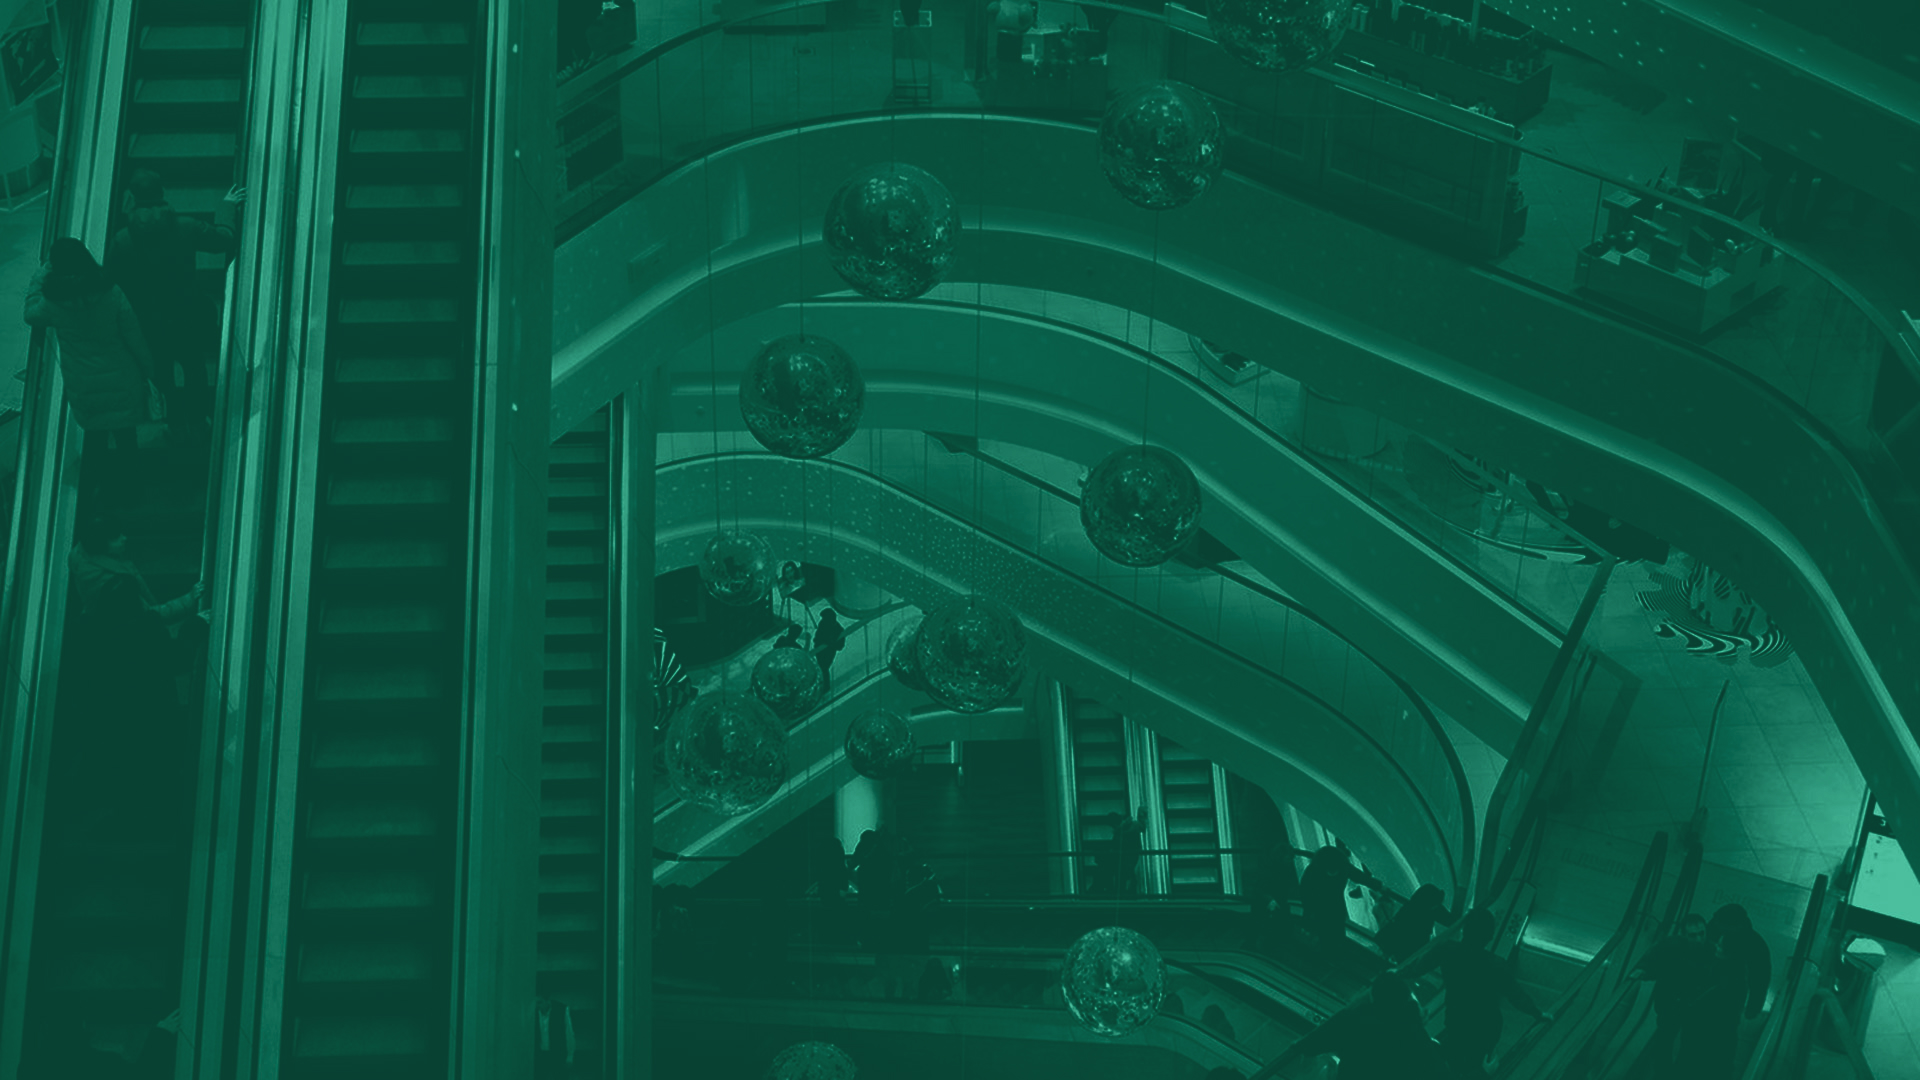 A photo of escalators and shoppers from the balcony inside of a multi-story shopping mall